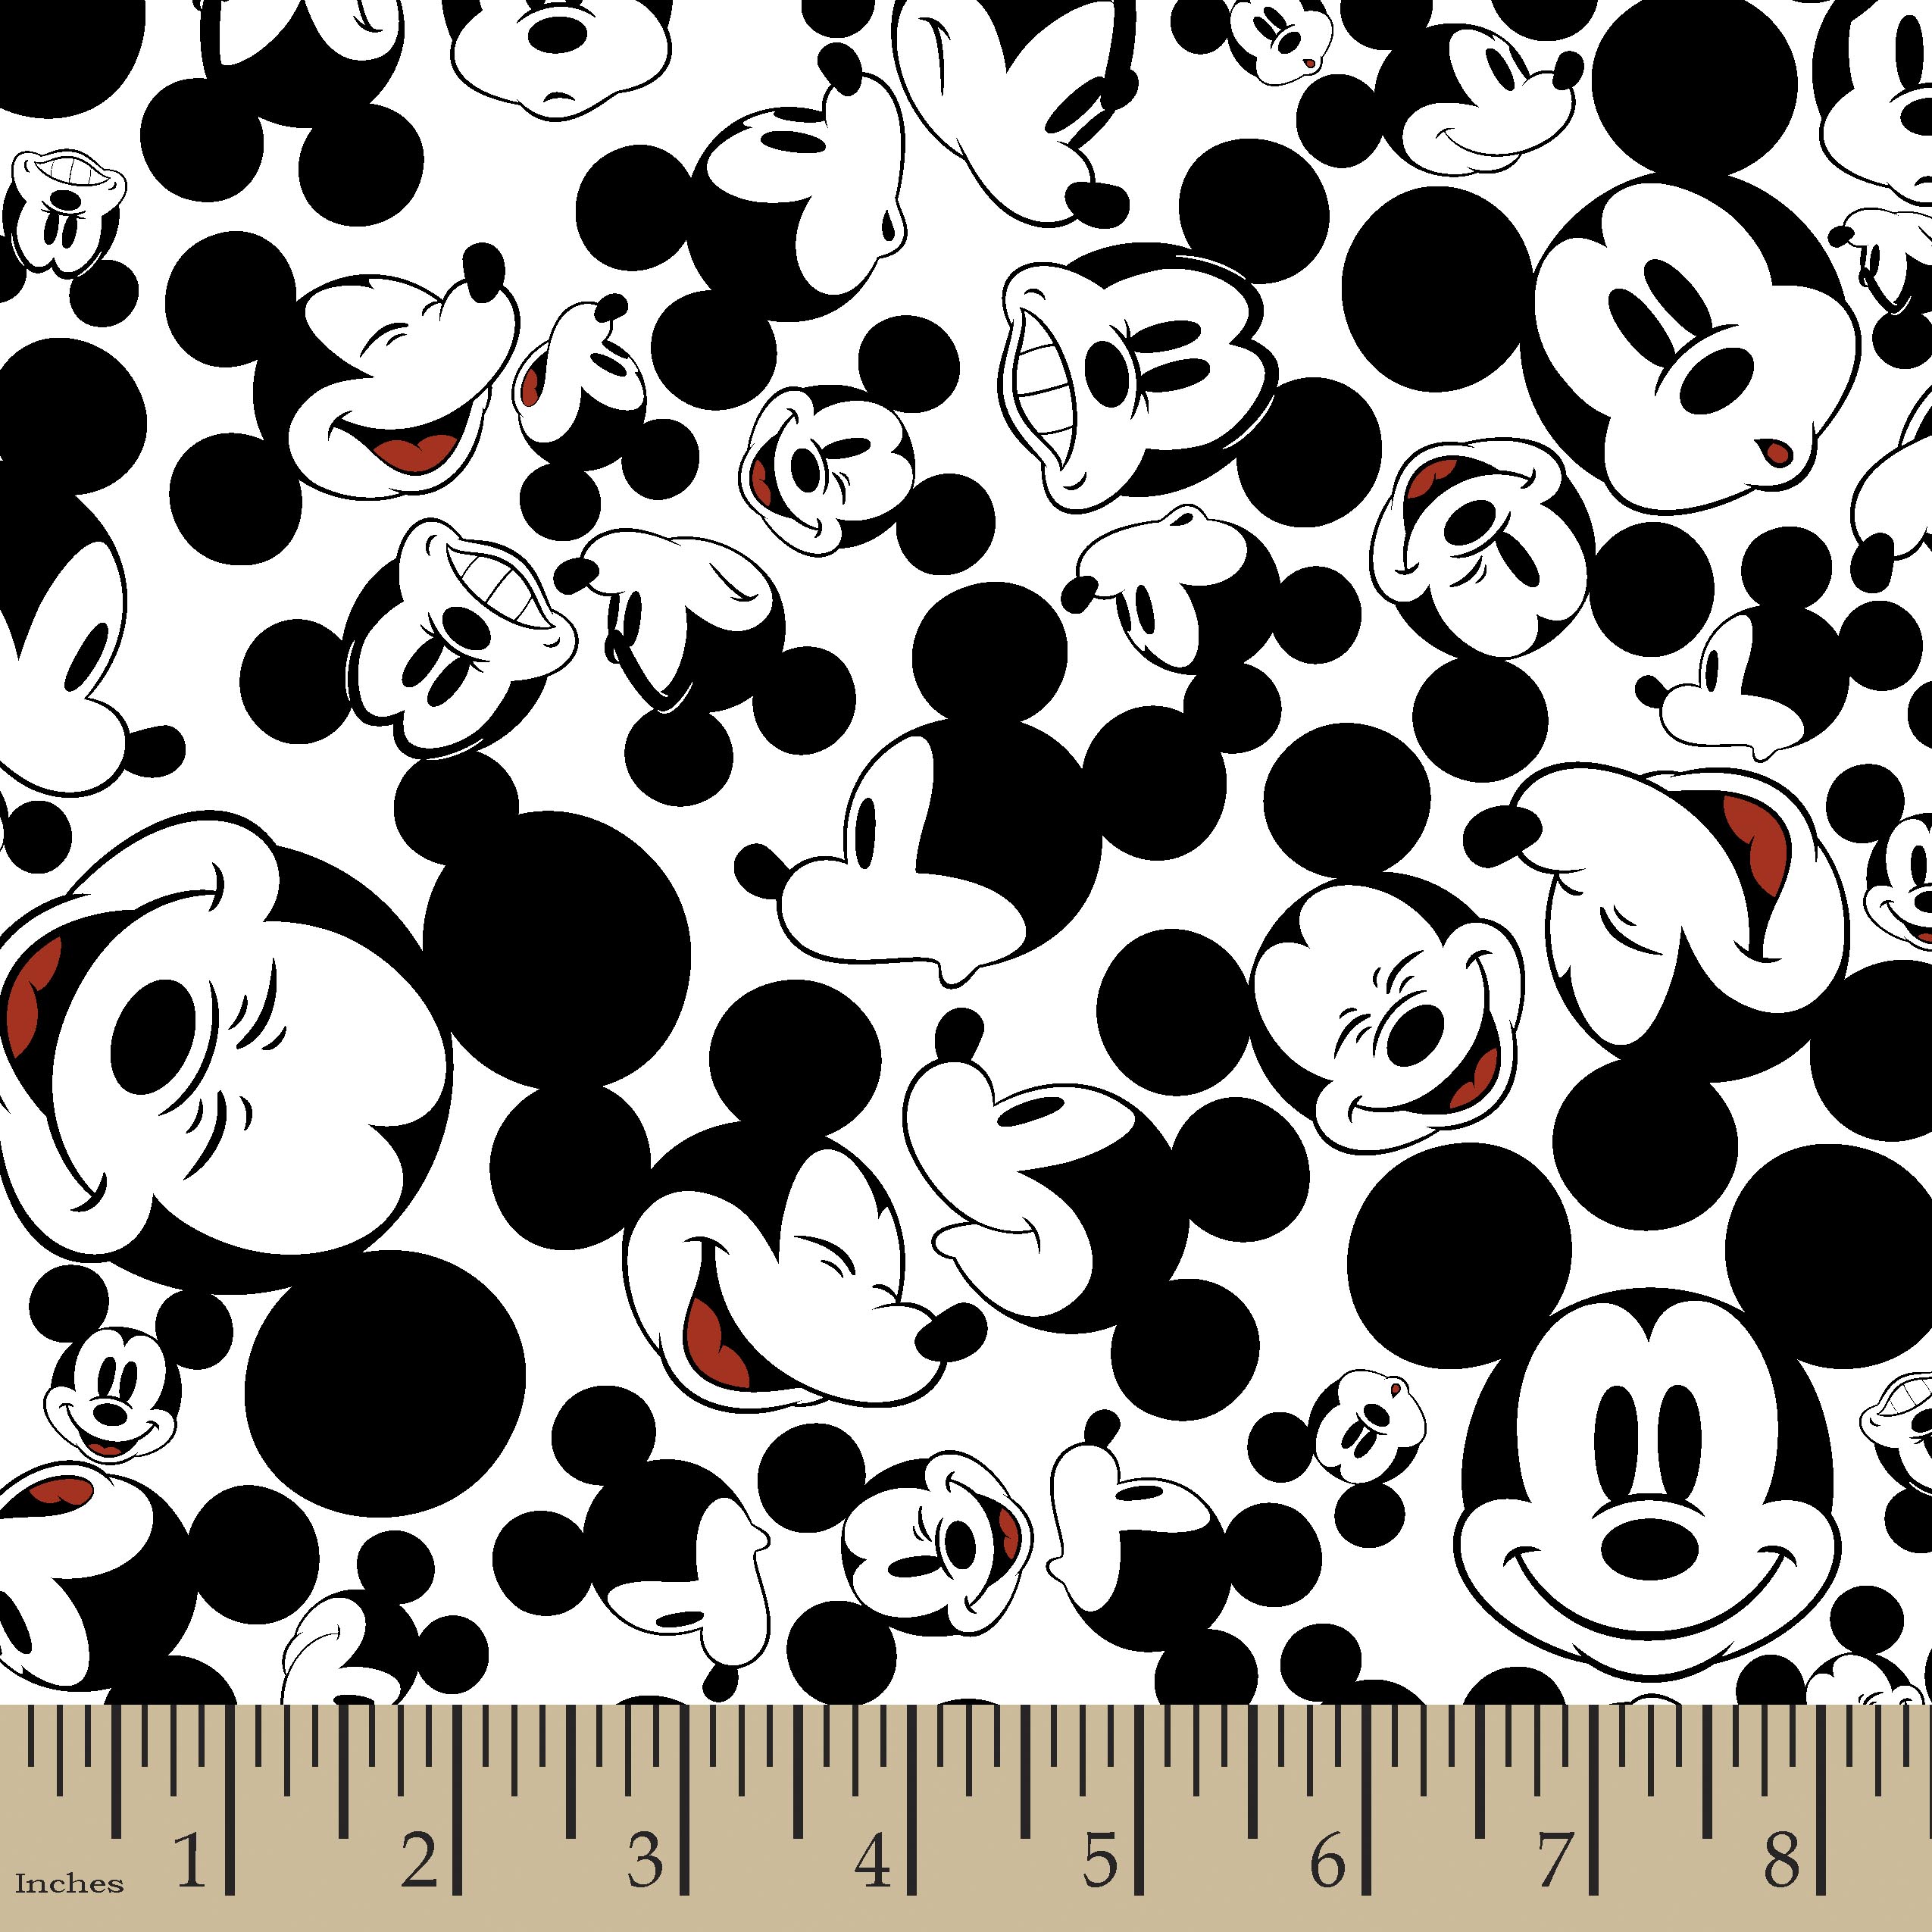 Springs Creative 18" x 22" Many Faces Of Mickey Precut Fabric, Black and White - image 1 of 3